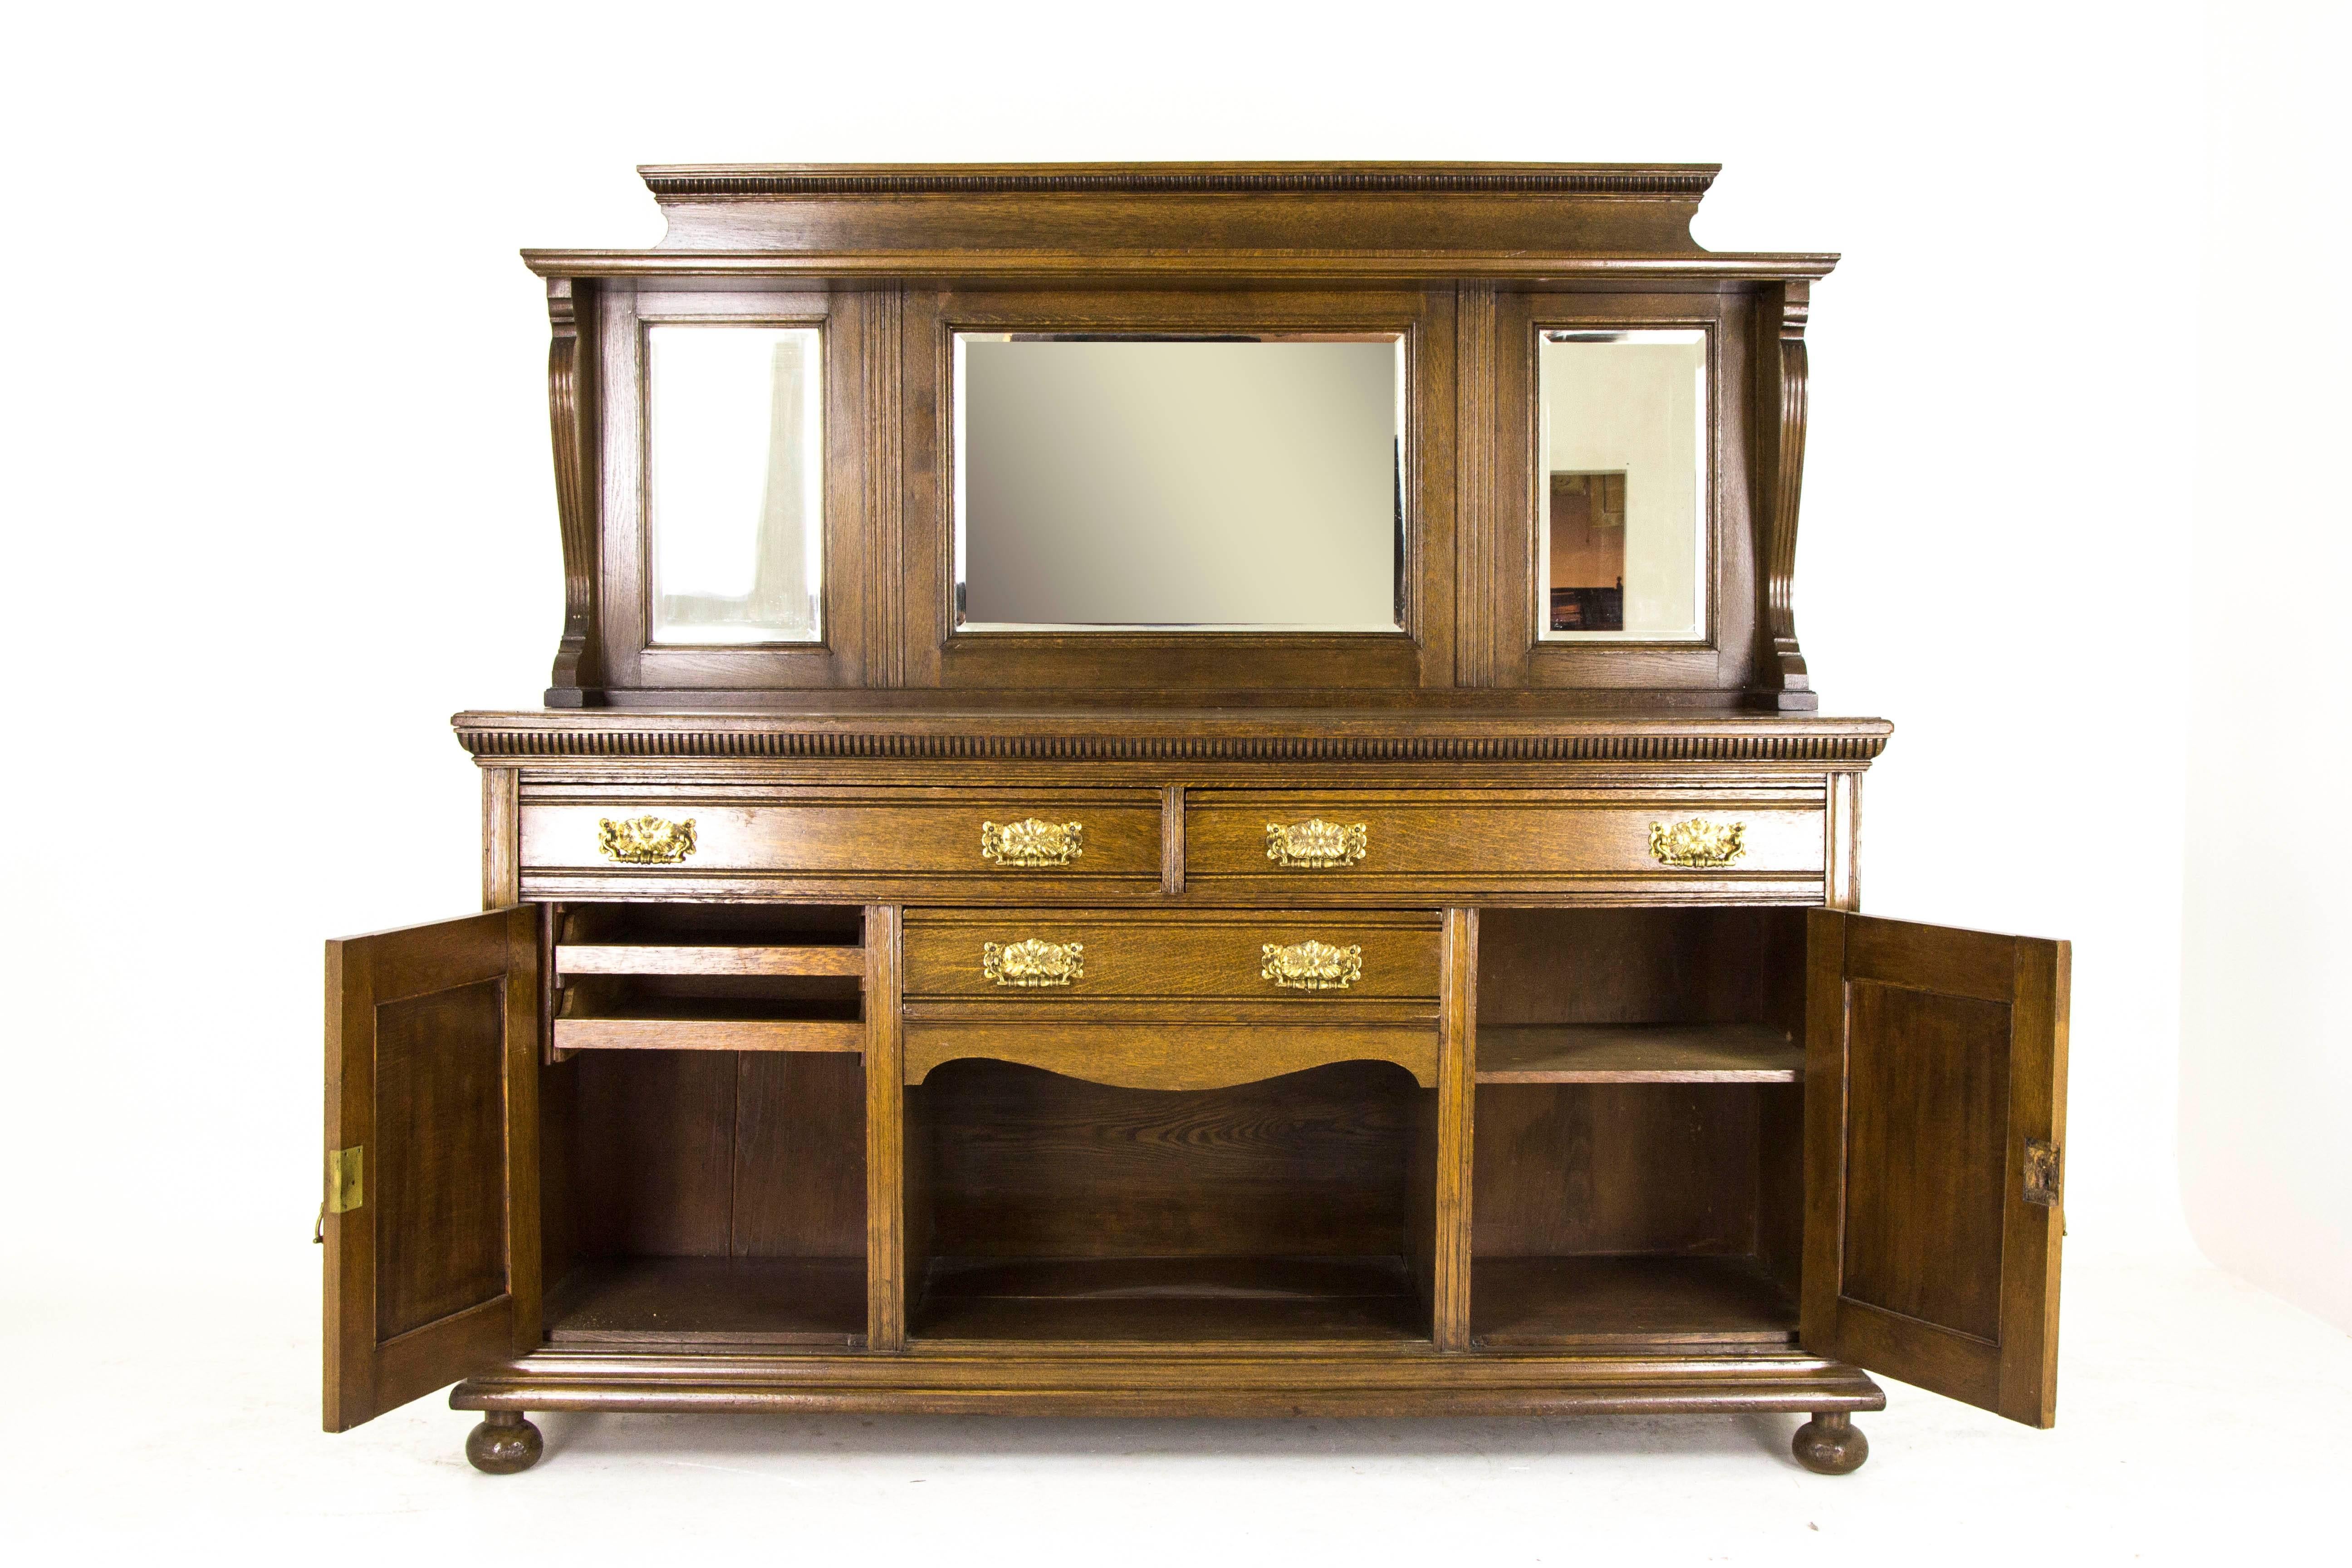 Antique oak sideboard Victorian oak buffet mirror back sideboard 1890 B795

Scotland 1890
Solid oak construction
Original medium oak finish
Carved back with upper shelf
Large beveled mirror flanked by two smaller ones
The base with two large